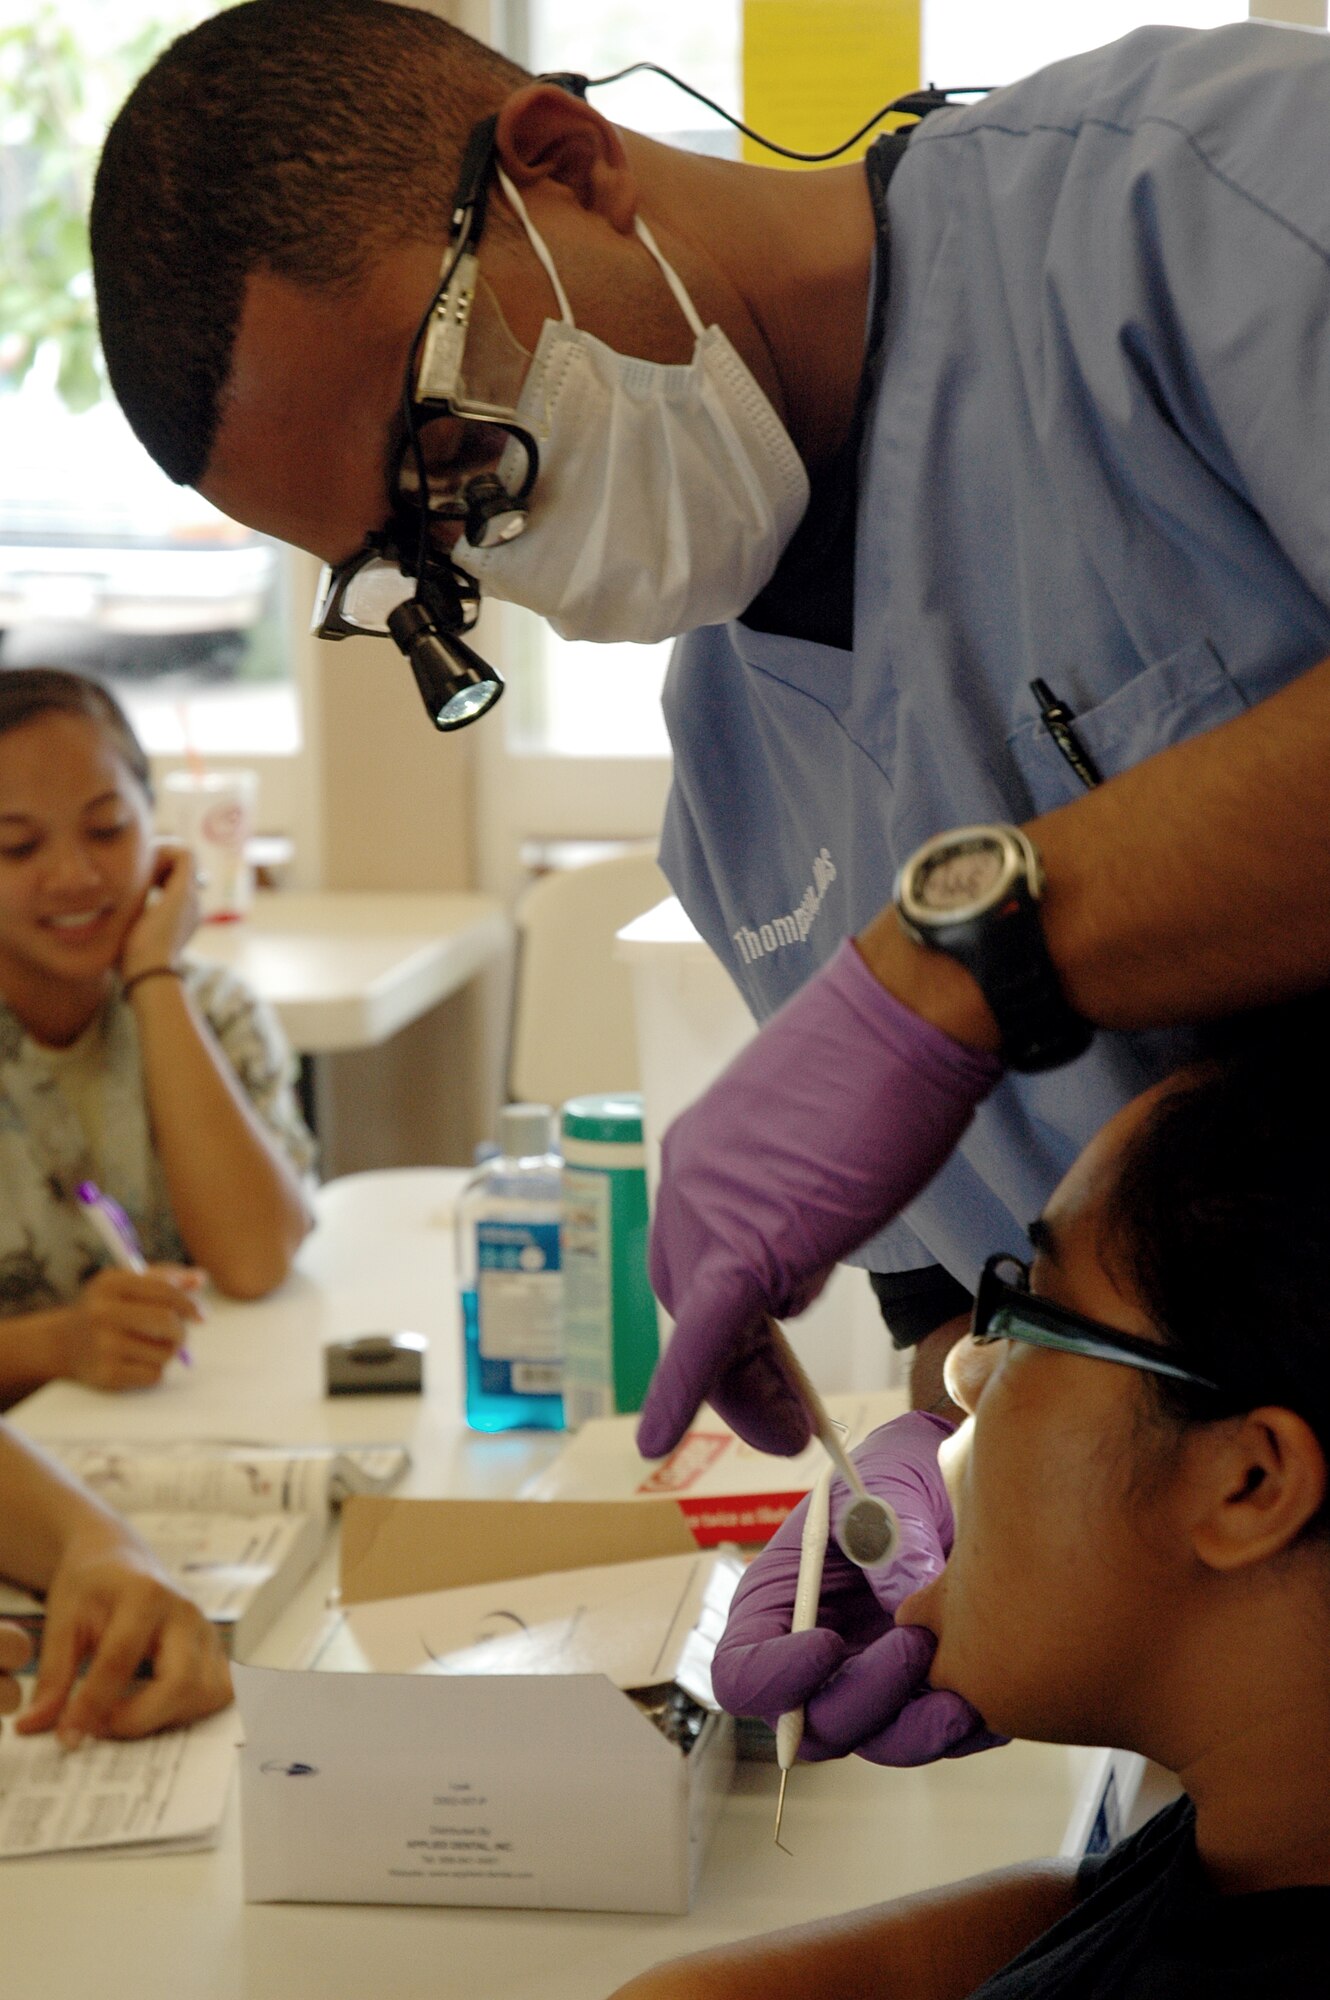 Maj. Stuart Thompson, 154th Medical Group, dentist, inspects child's teeth during Innovative Readiness Training-community outreach in Waianae, Hawaii, July 16. Innovative Readiness Training is an opportunity for Guard members to complete mission essential training while performing free medical services to the community. (U.S. Air Force photo/Tech. Sgt. Betty J. Squatrito-Martin)